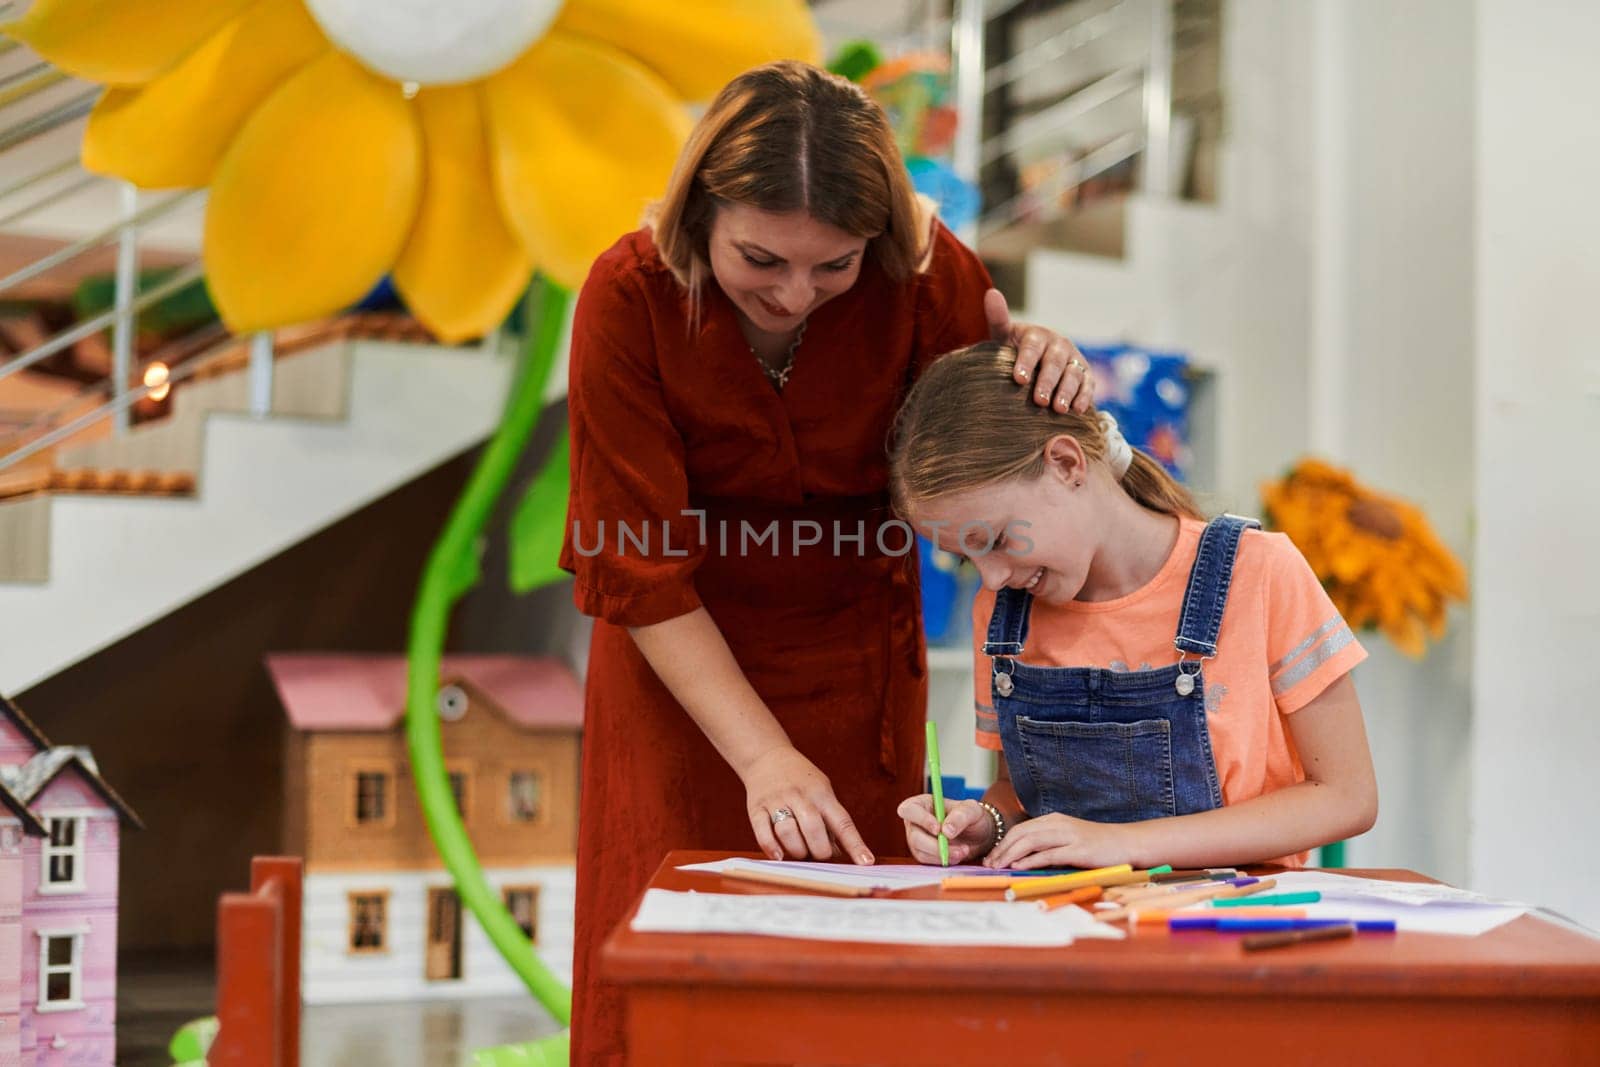 Creative kids during an art class in a daycare center or elementary school classroom drawing with female teacher. High quality photo